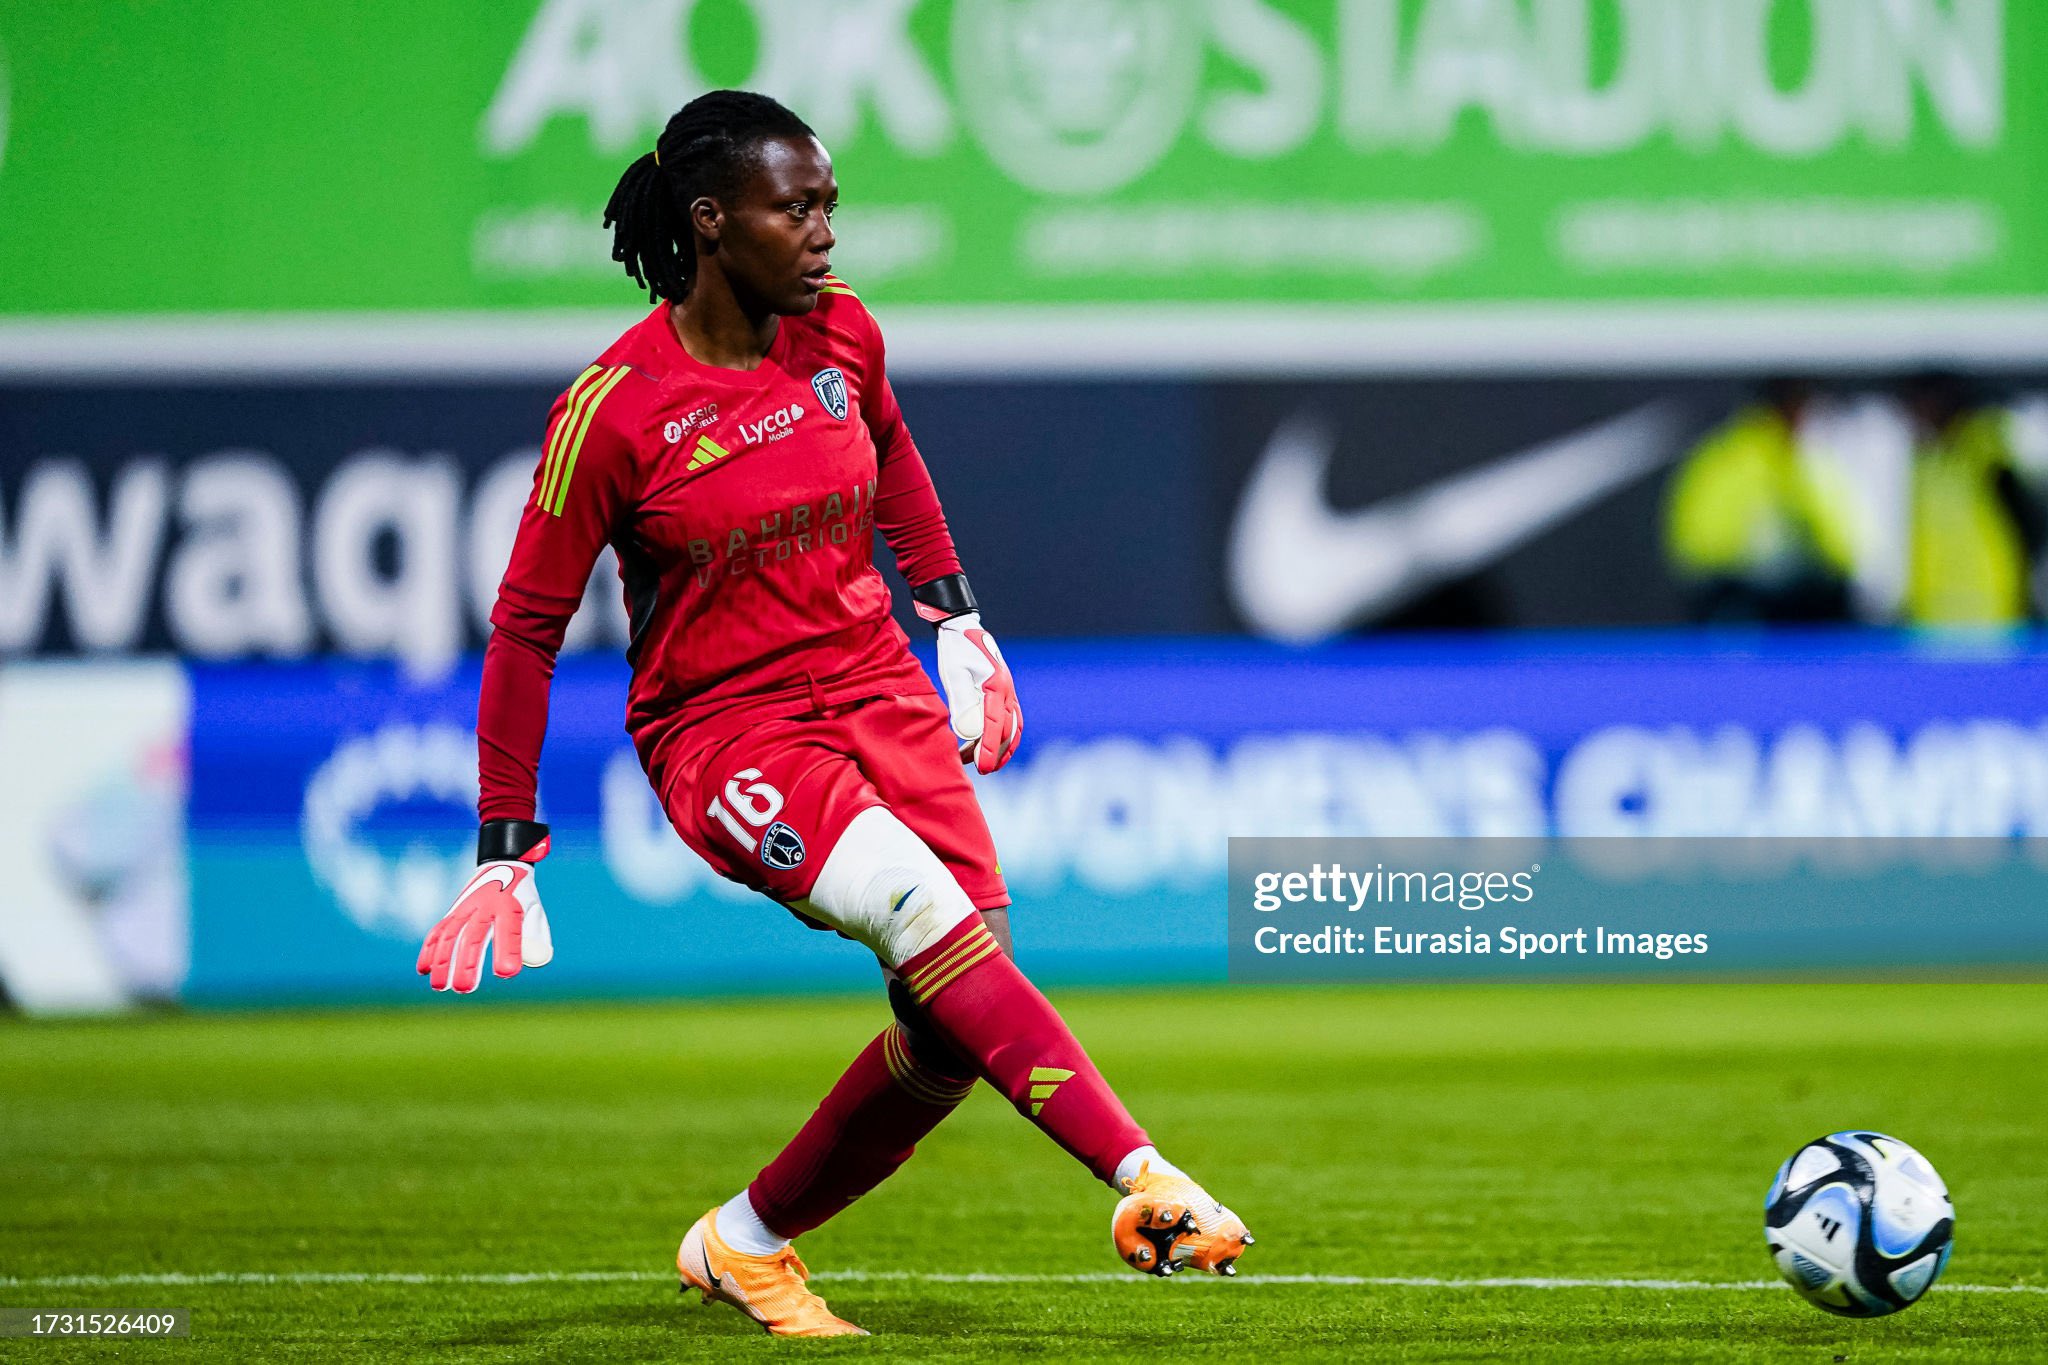 UEFAWCL: Chiamaka Nnadozie saves penalty to offer Paris FC first Champions League win this season